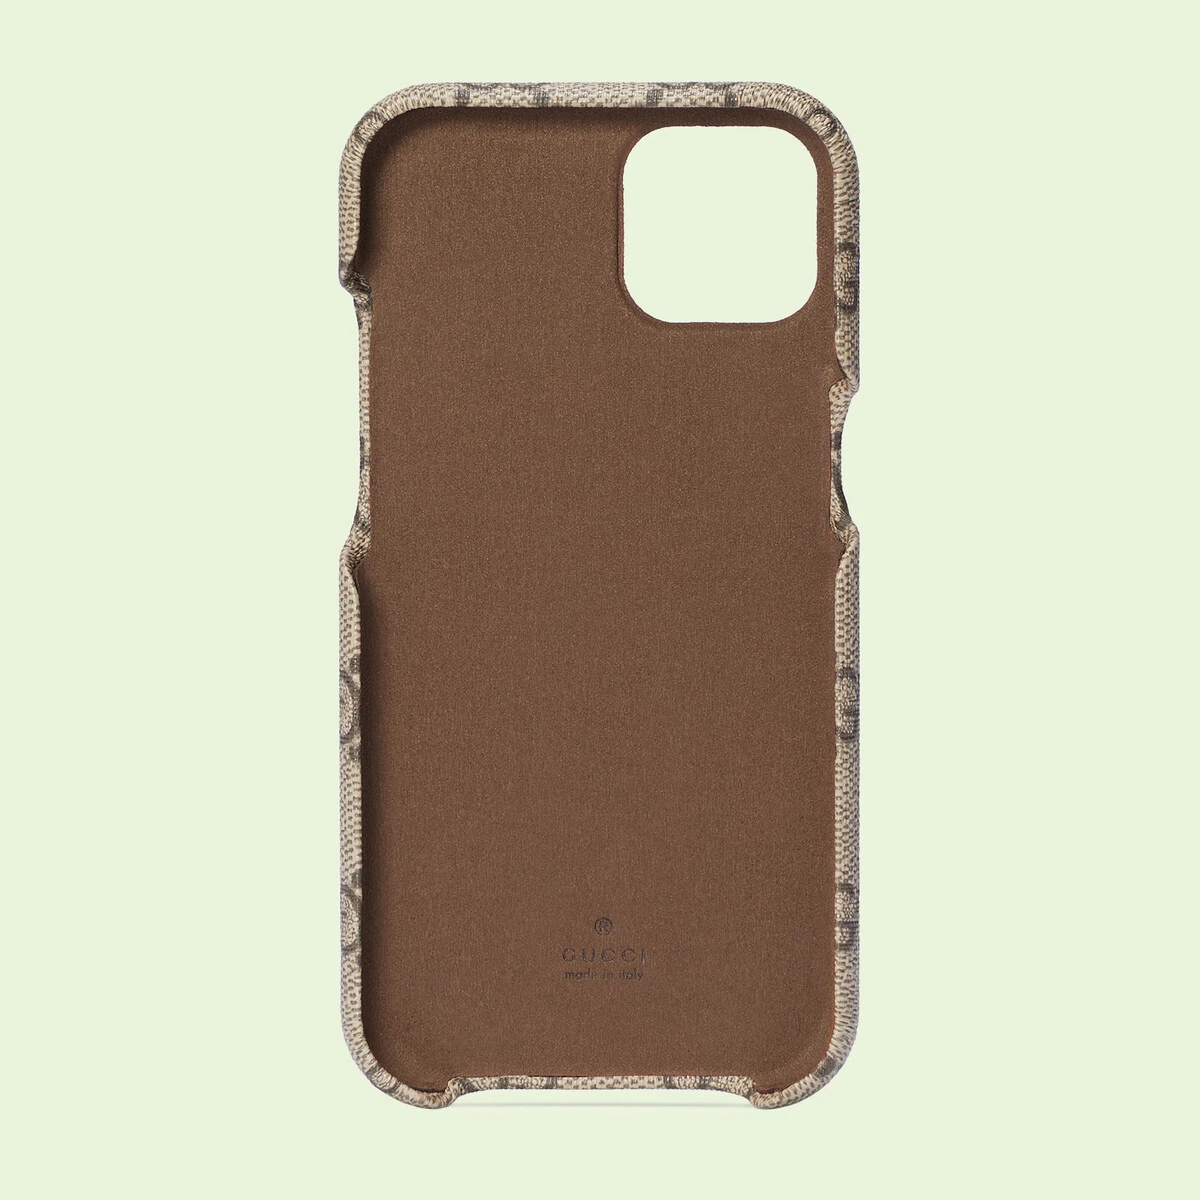 Ophidia case for iPhone 13 - 2